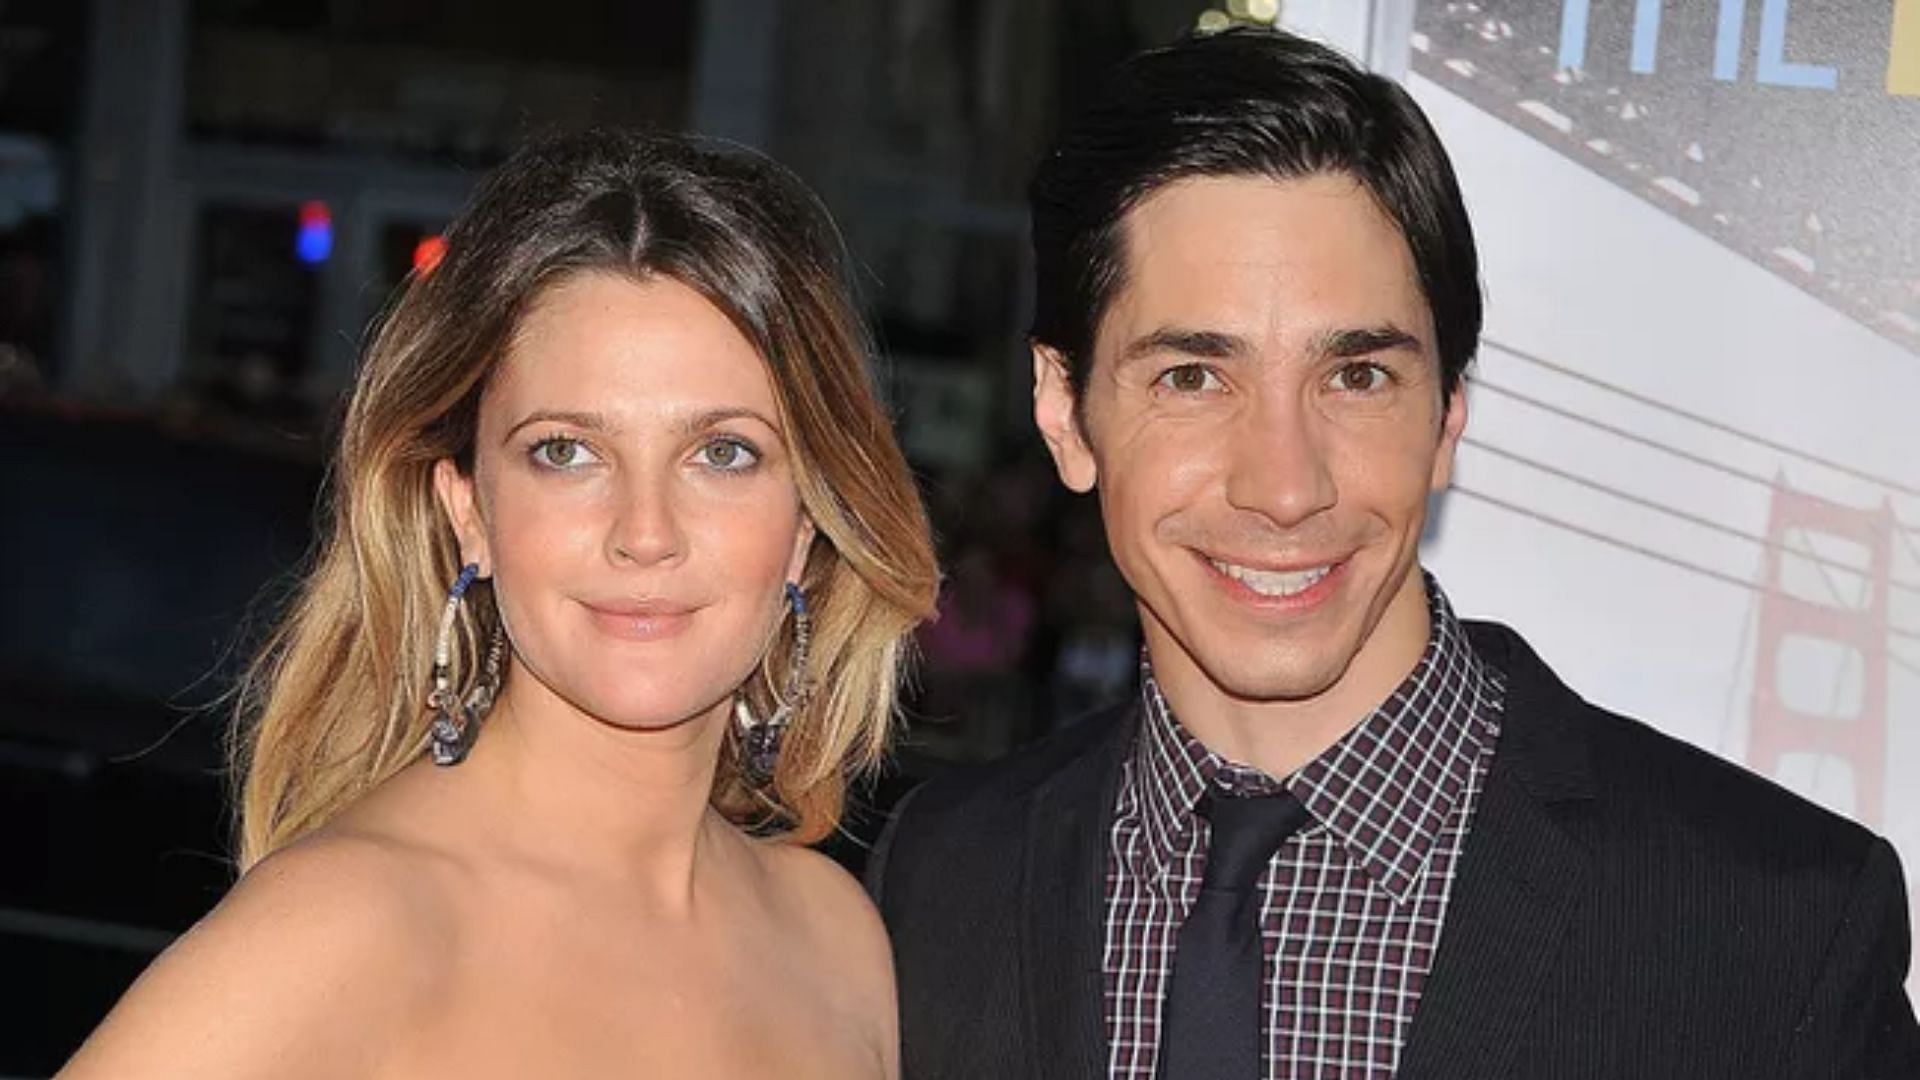 Former flames Drew Barrymore and Justin Long open up on their old relationship. (Image via Frank Trapper/Corbis/Getty Images)